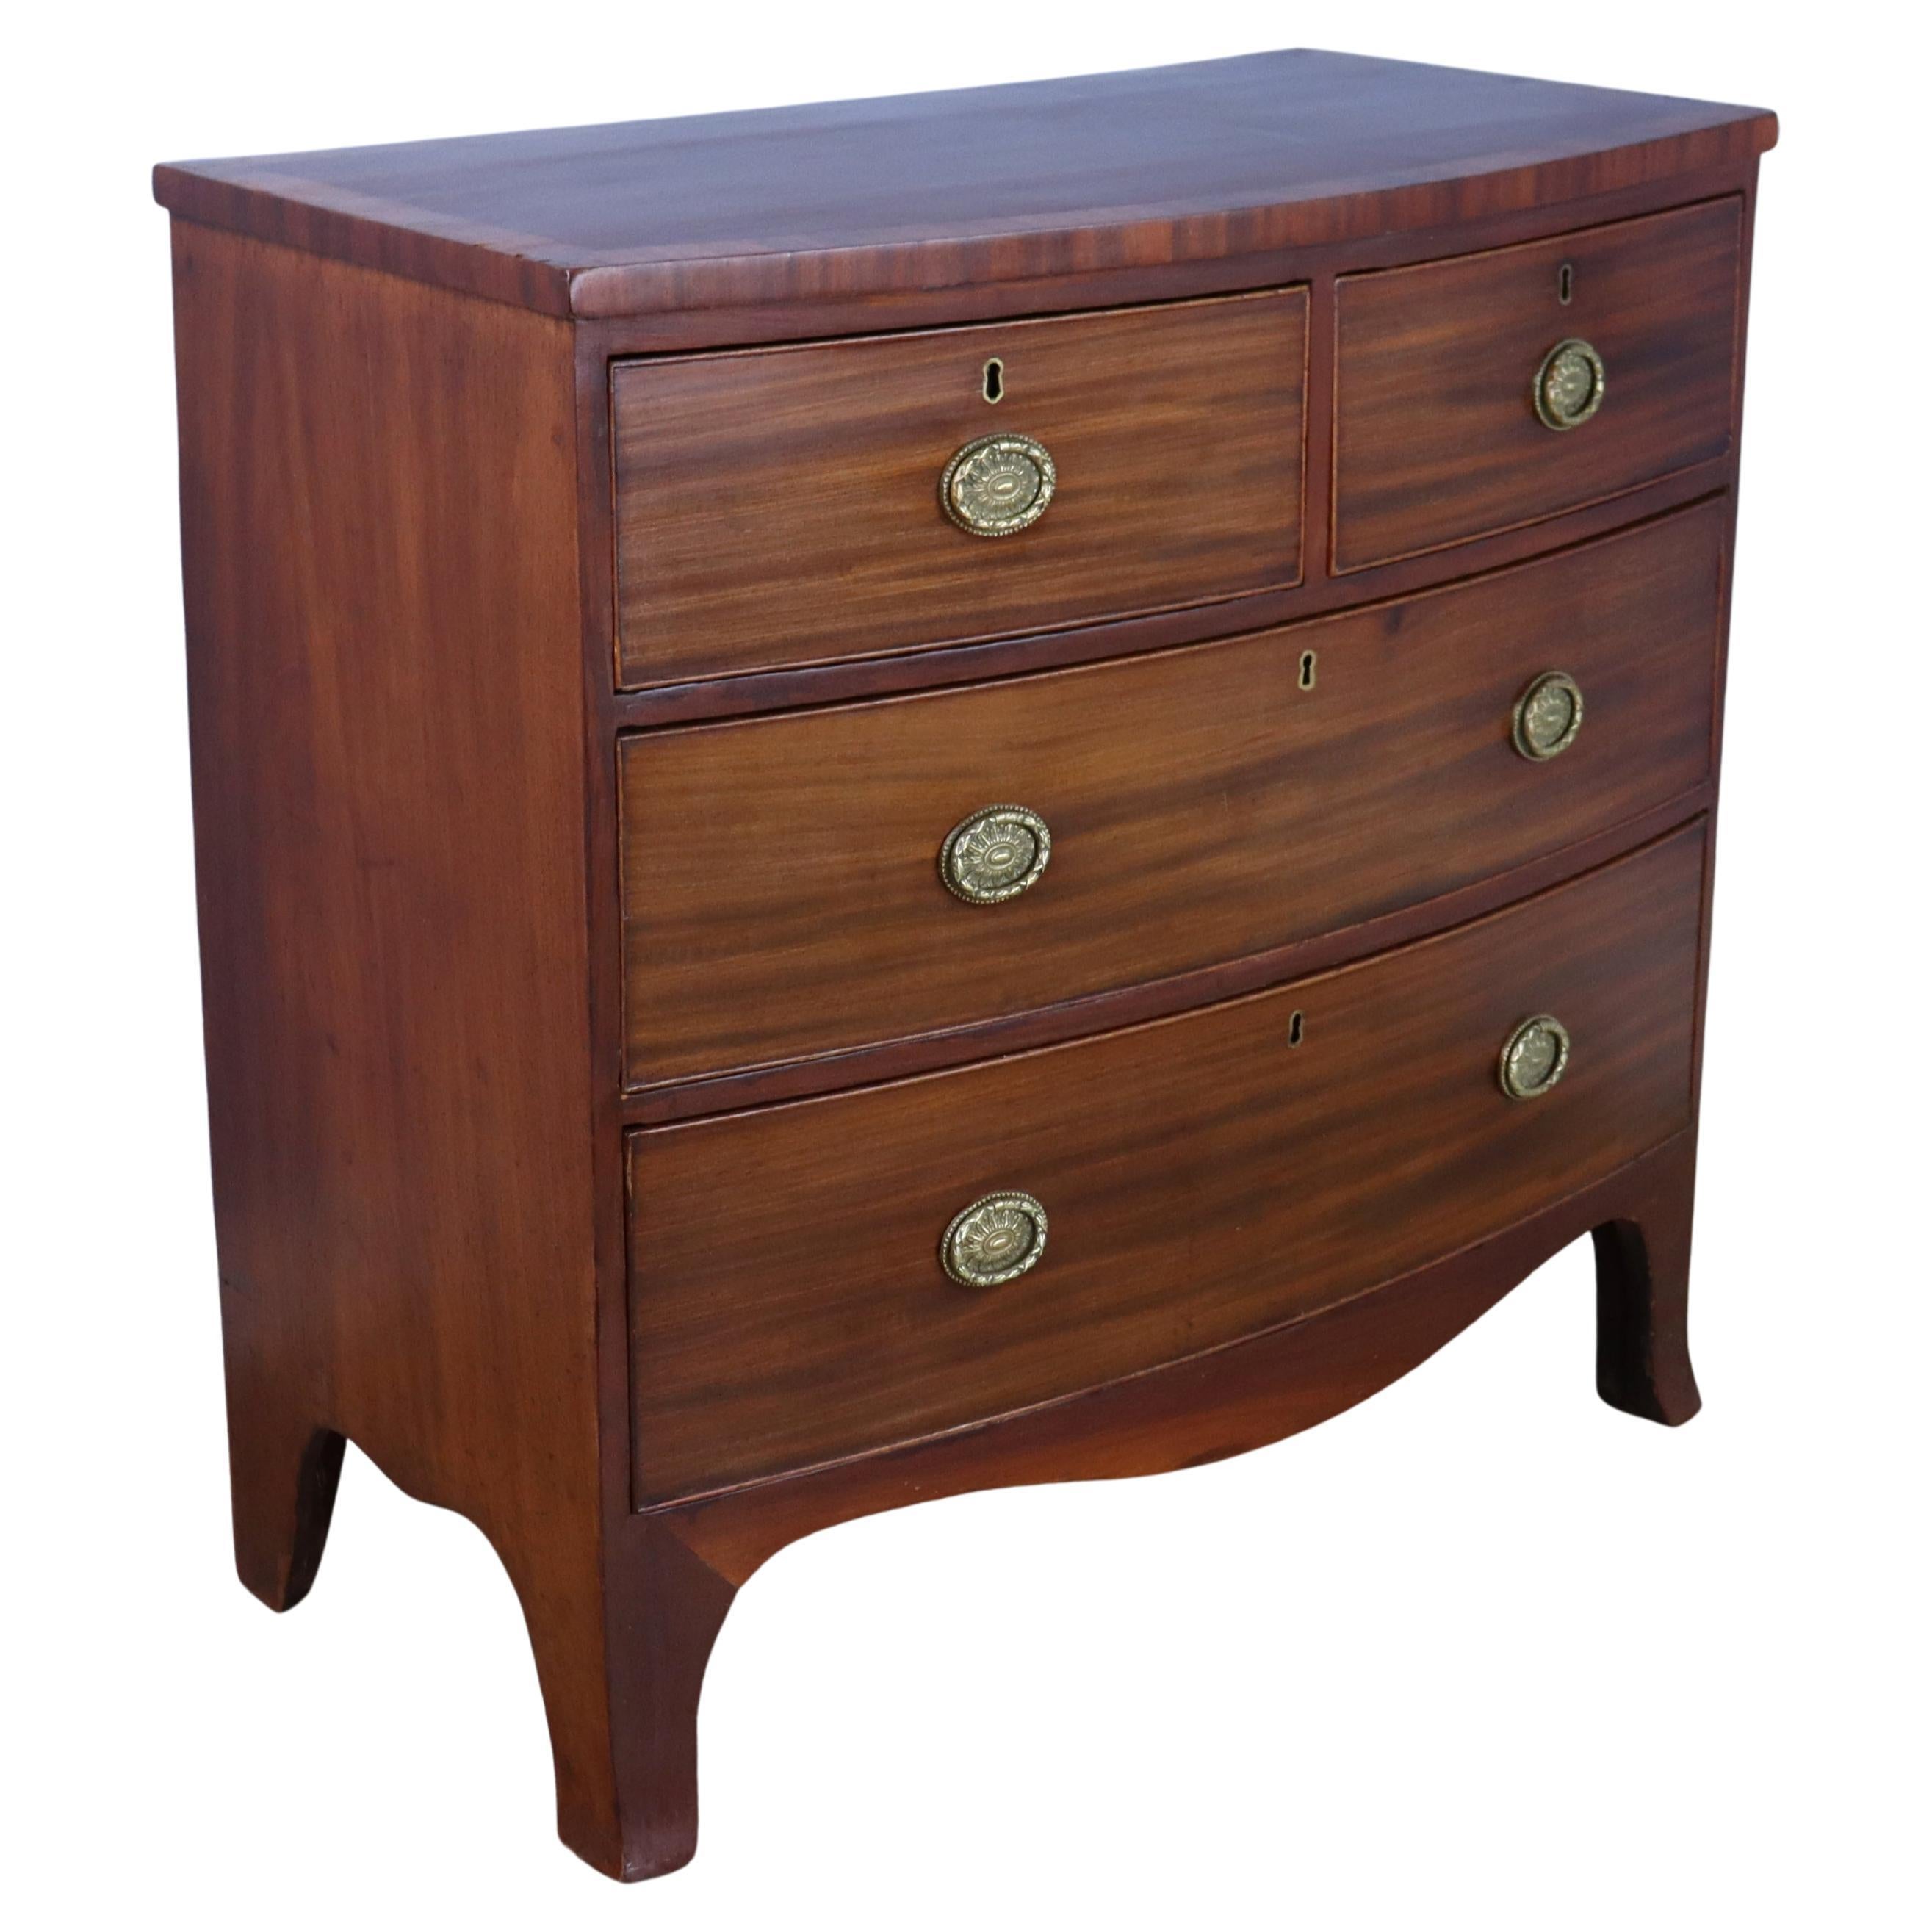 Two-over-two Mahogany Bowfront Chest with Original Feet and Brasses